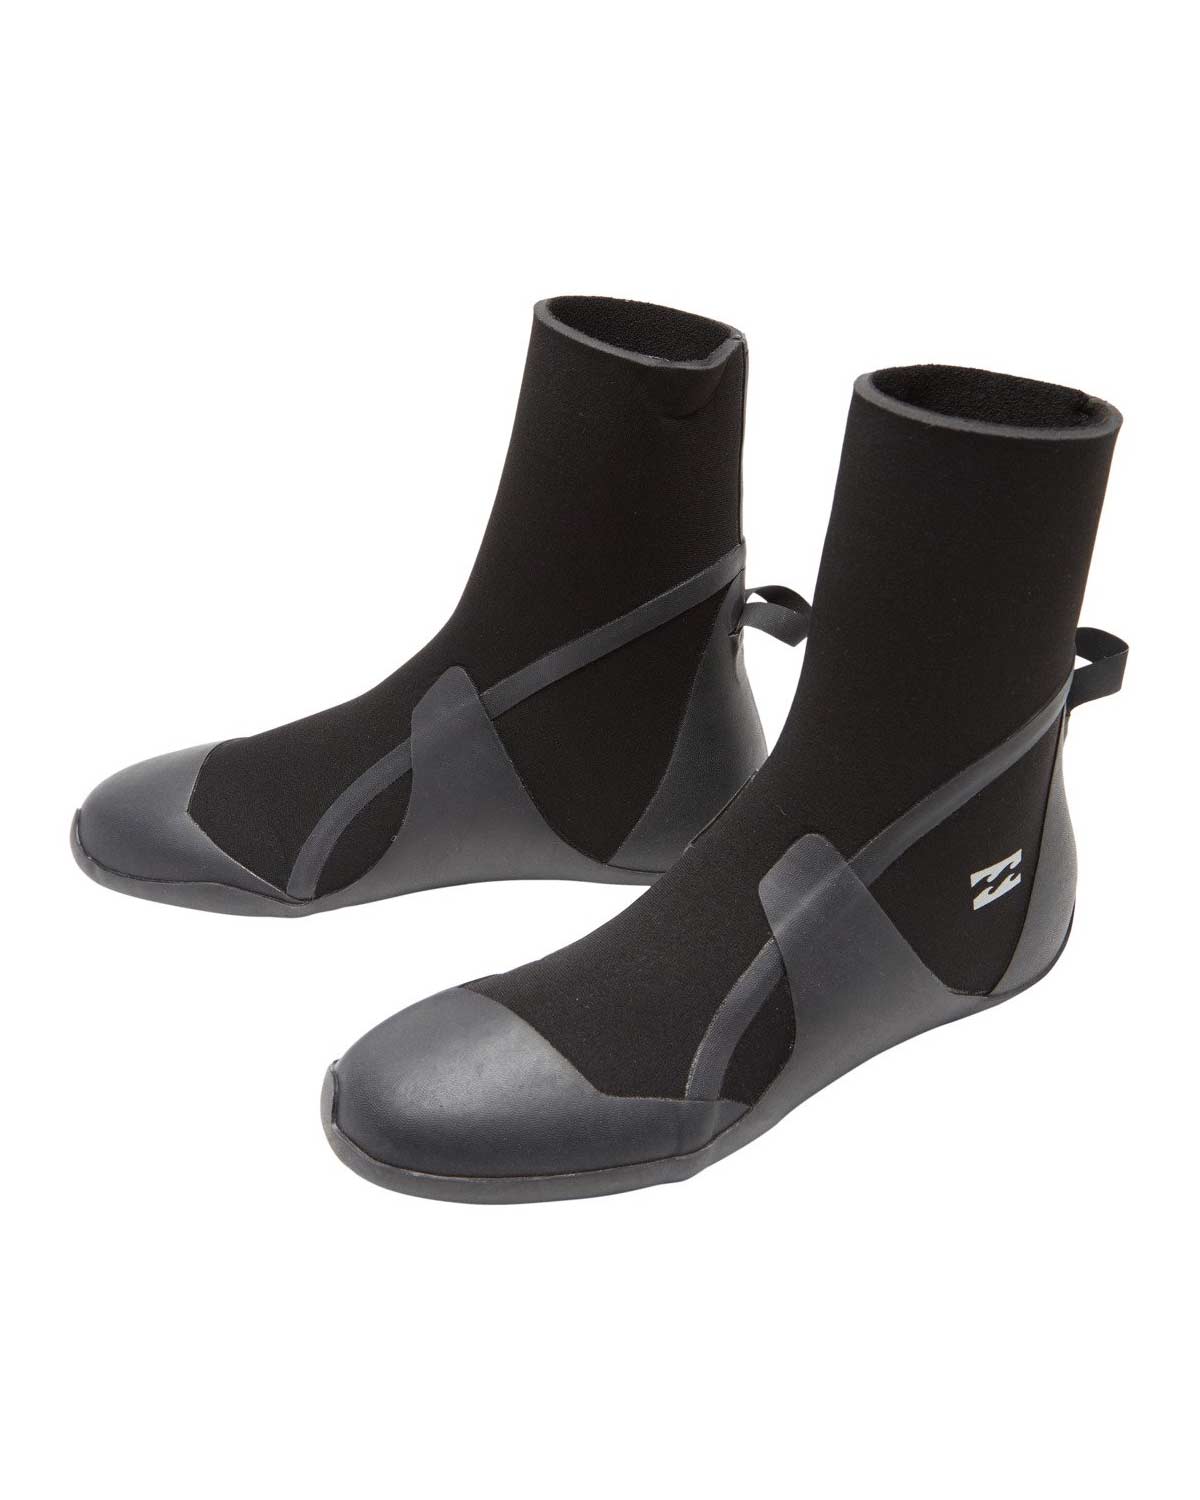 5mm Billabong ABSOLUTE Round Toe Wetsuit Boots